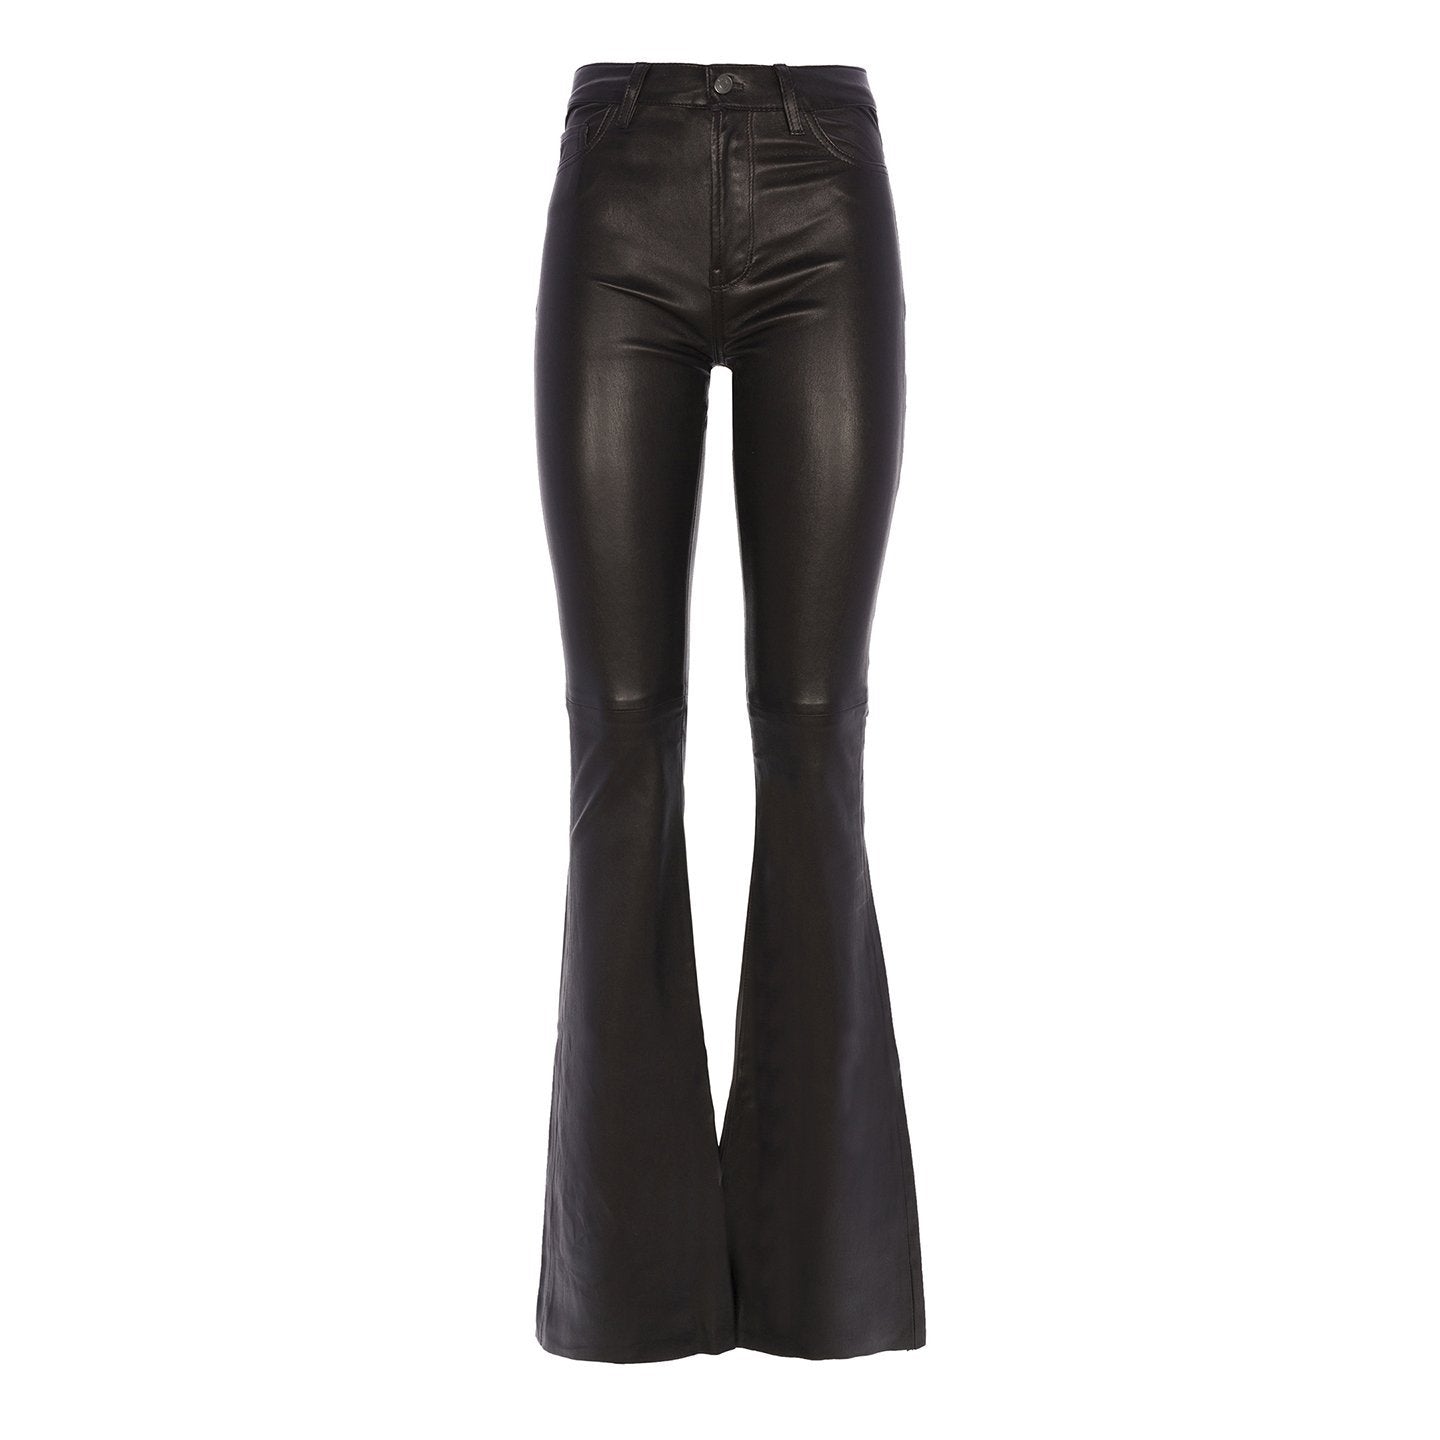 Womens High Waist PU Leather Pants Slim Fitted Flare Bootcut Pants Sexy  Stretchy Wide Leg Leather Pants Trousers - Walmart.com